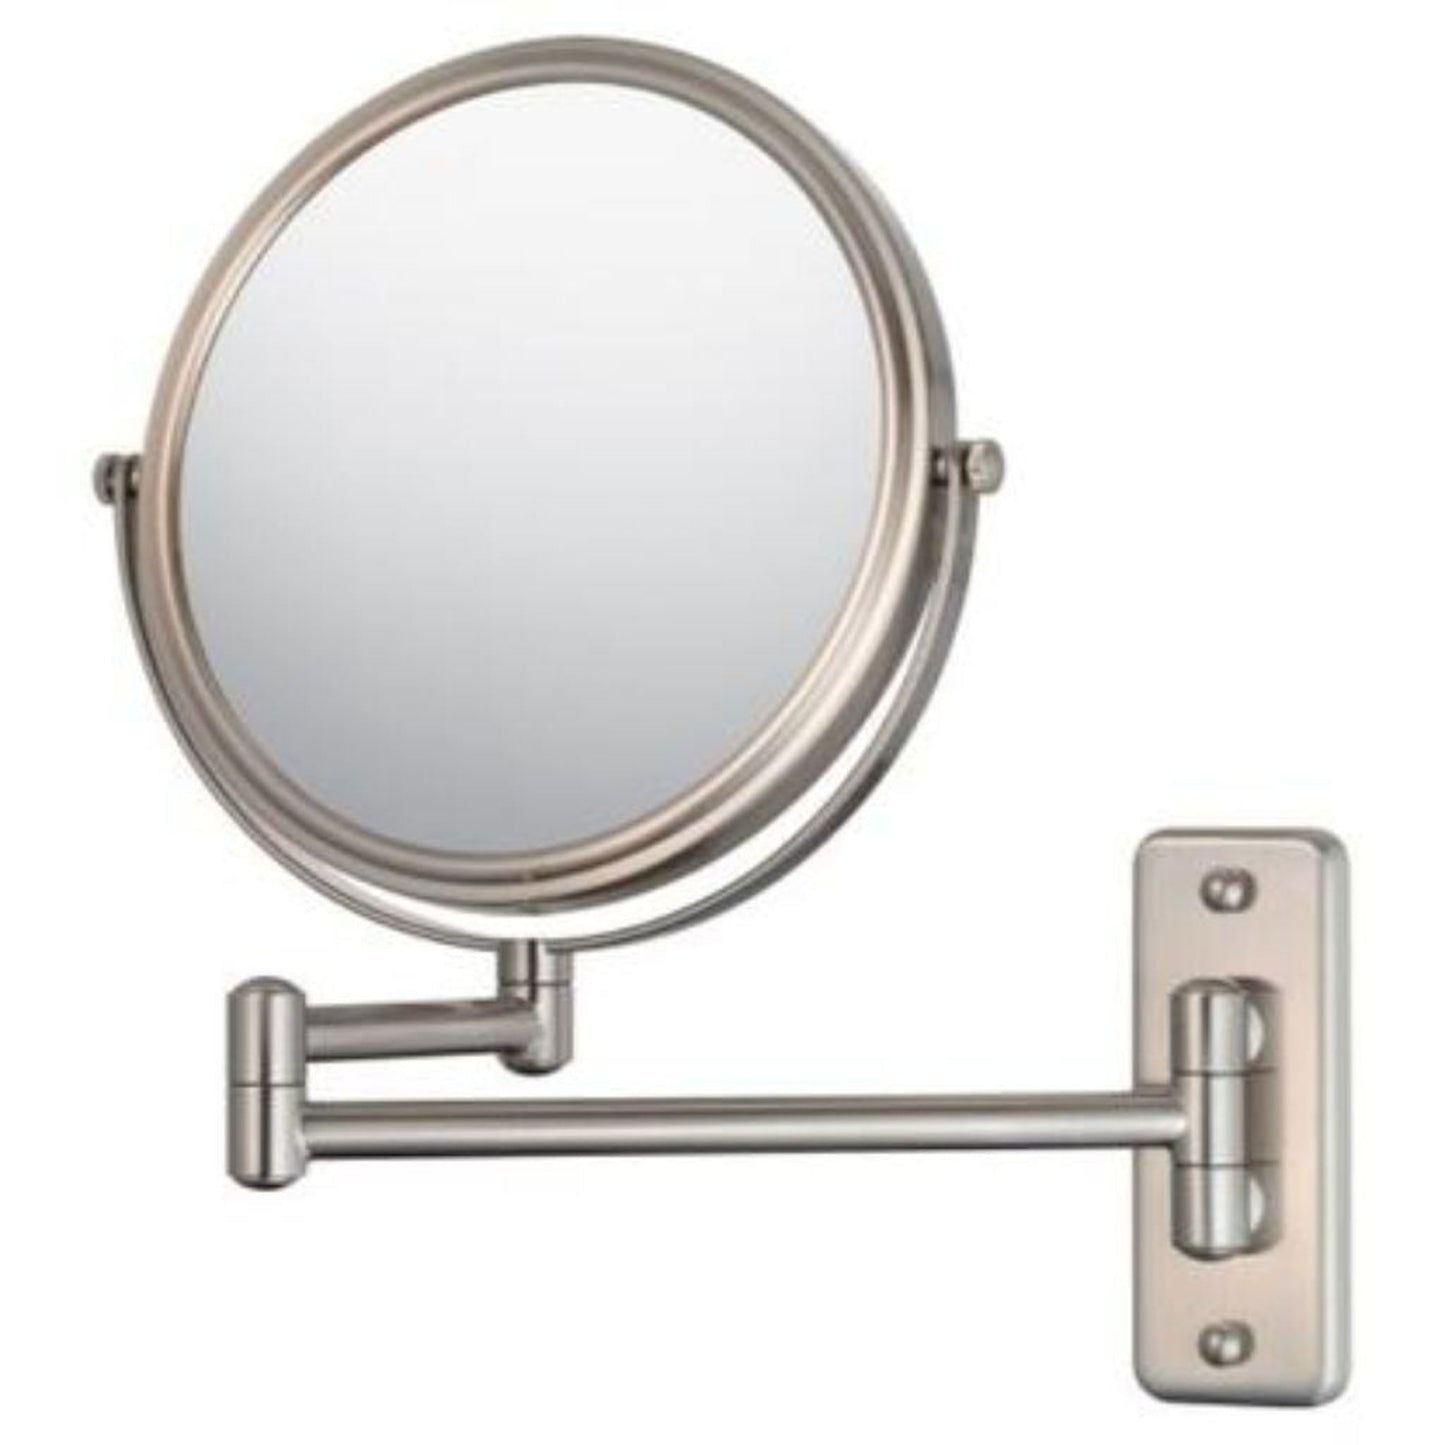 Aptations Mirror Image 10" x 12" Brushed Nickel Wall-MountedRound Double Sided Double Arm 1X/5X Magnified Makeup Mirror